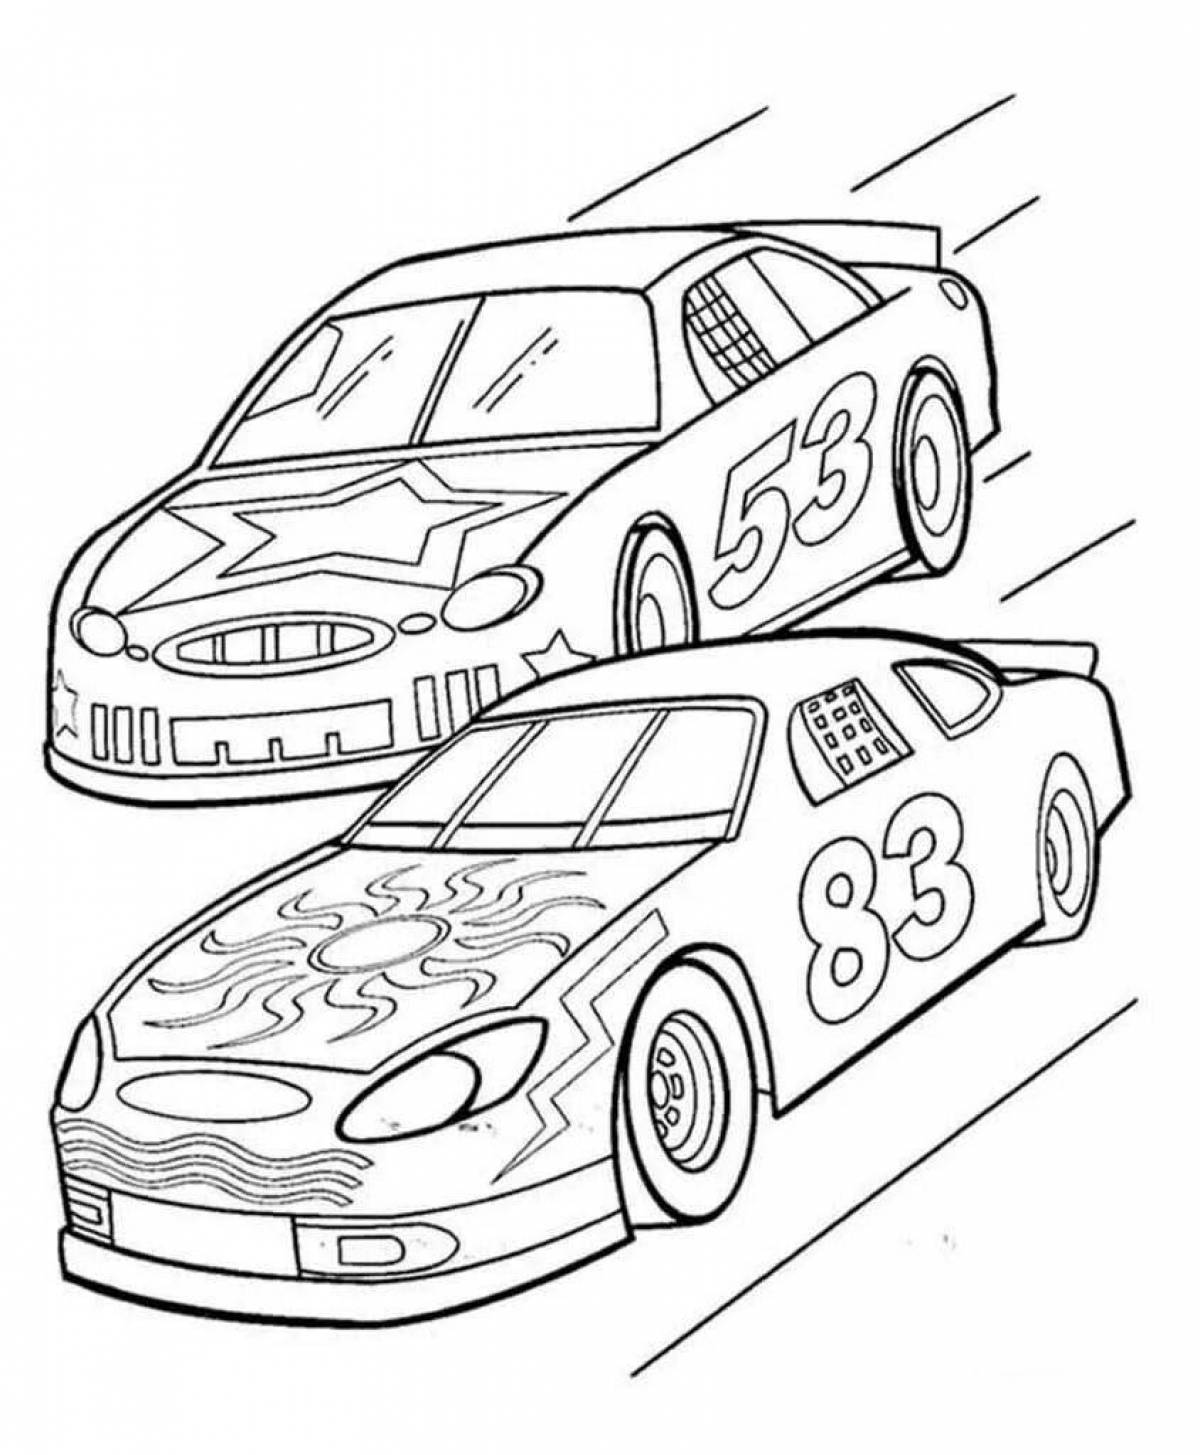 Coloring pages luxury cars 6 years old